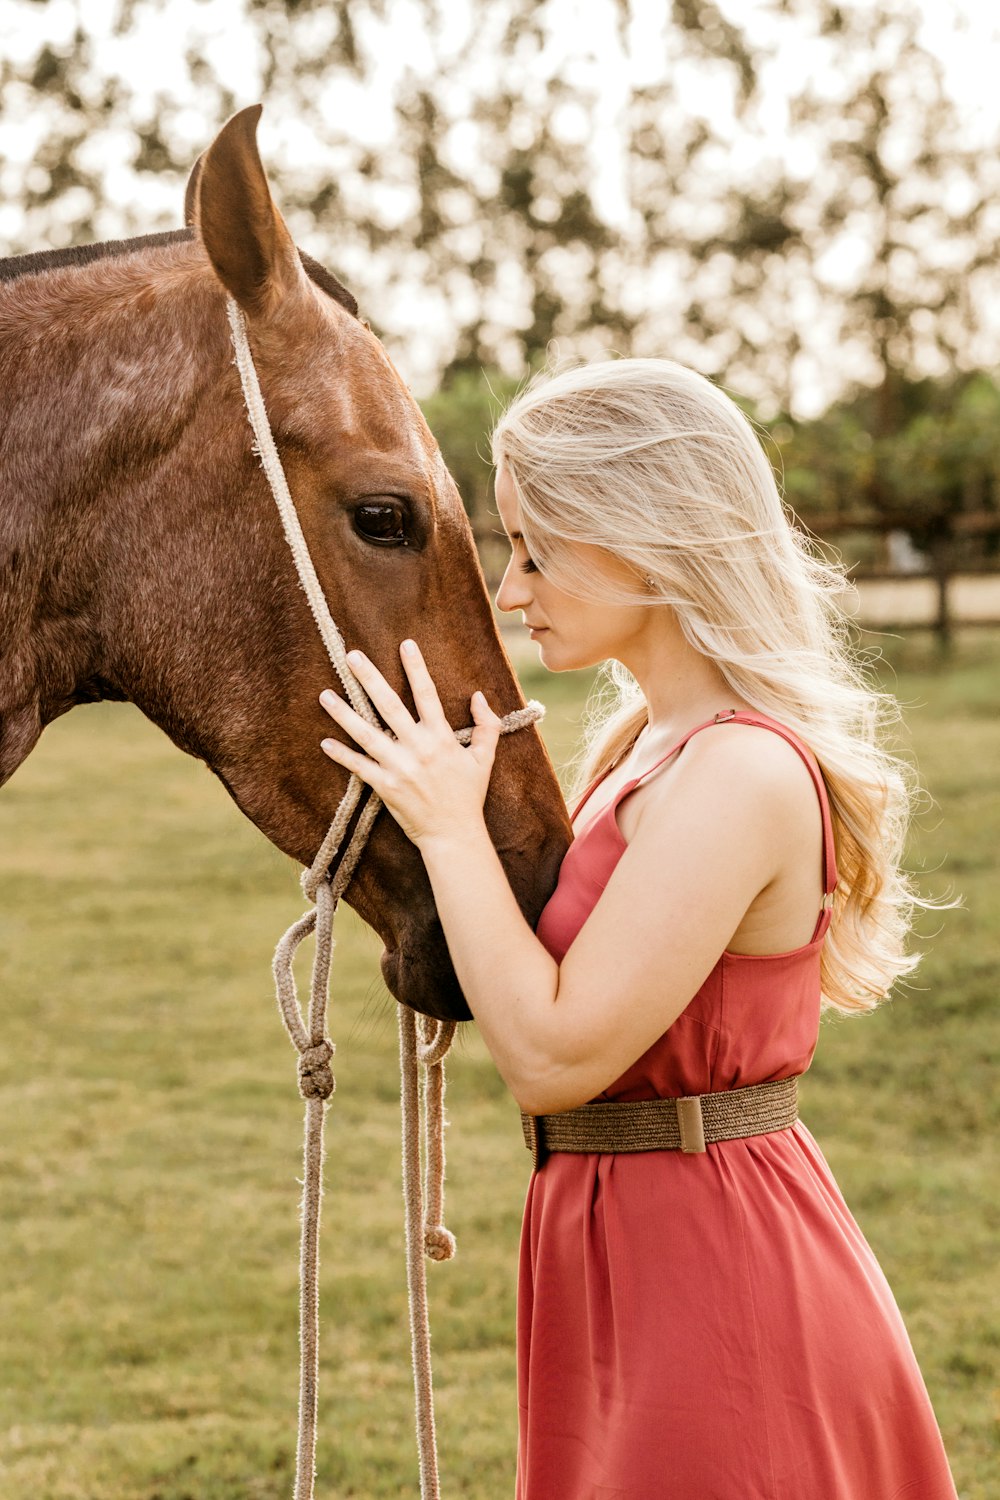 woman in red dress standing beside brown horse during daytime